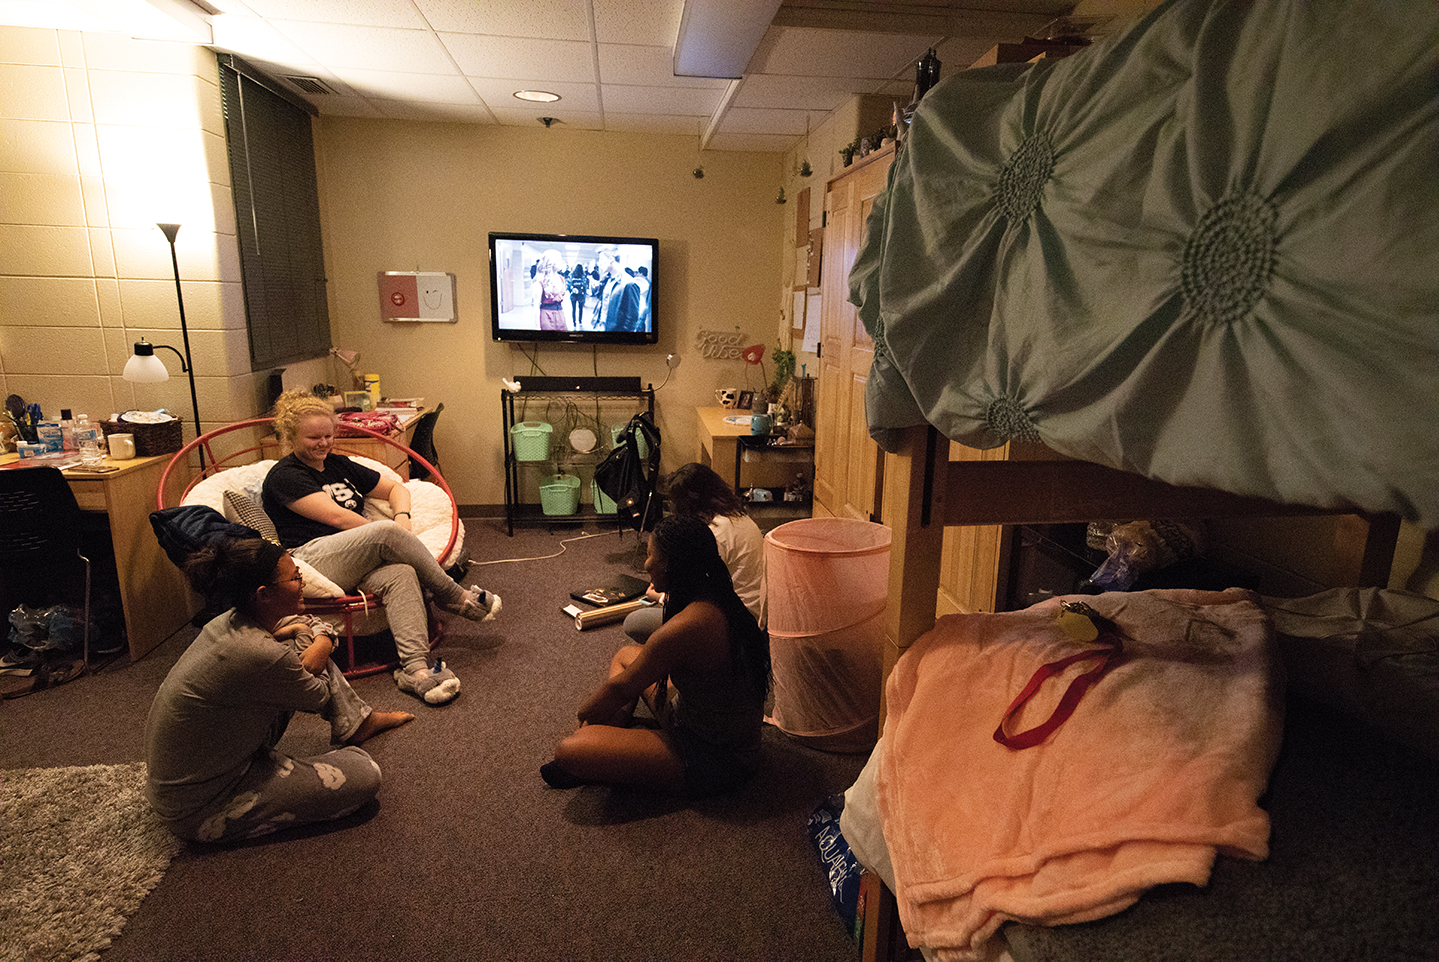 University Housing makes accommodations for an overflow of students